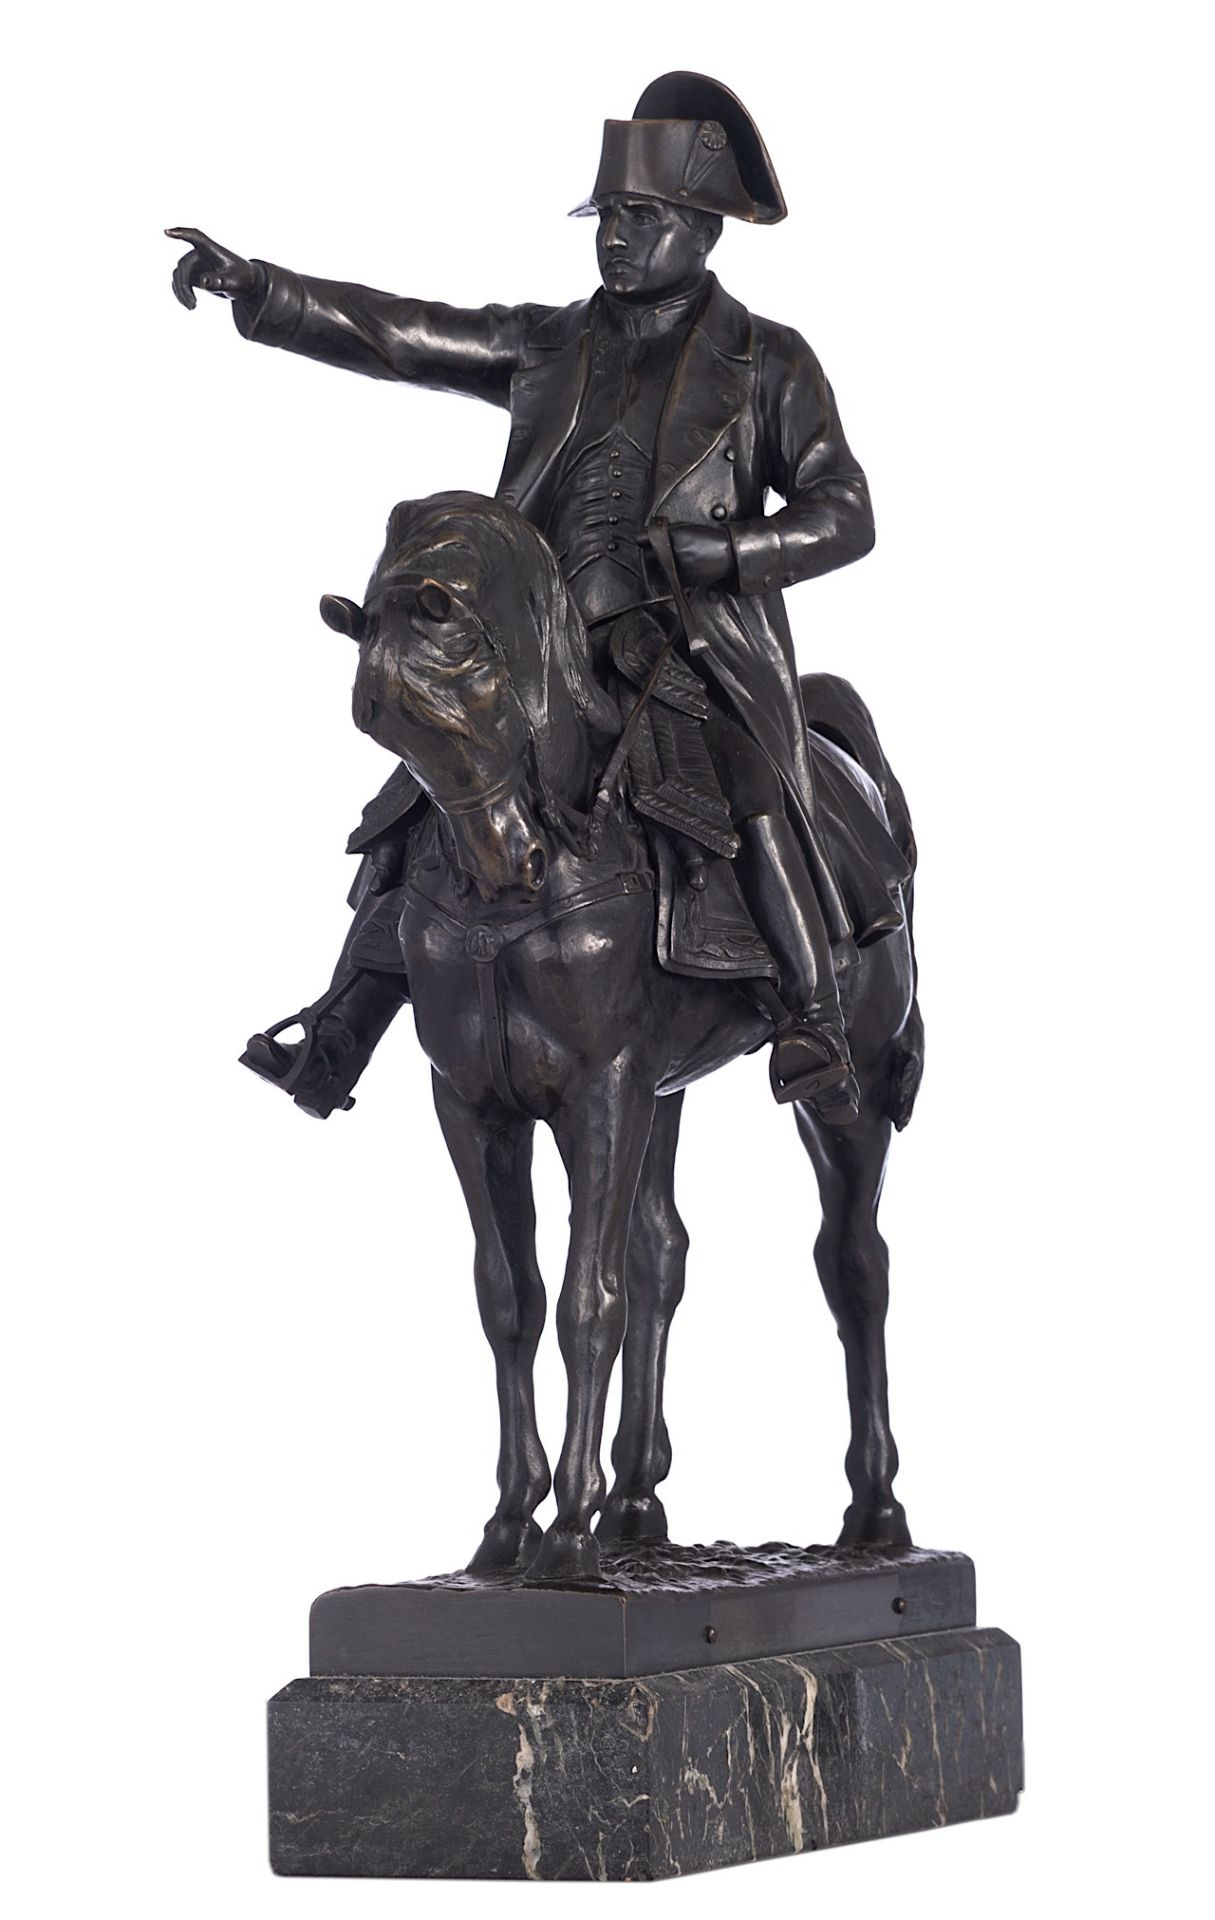 Ernest Charles Guilbert (1848-1913), Equestrian of Napoleon, 1910, patinated bronze, H 40 cm